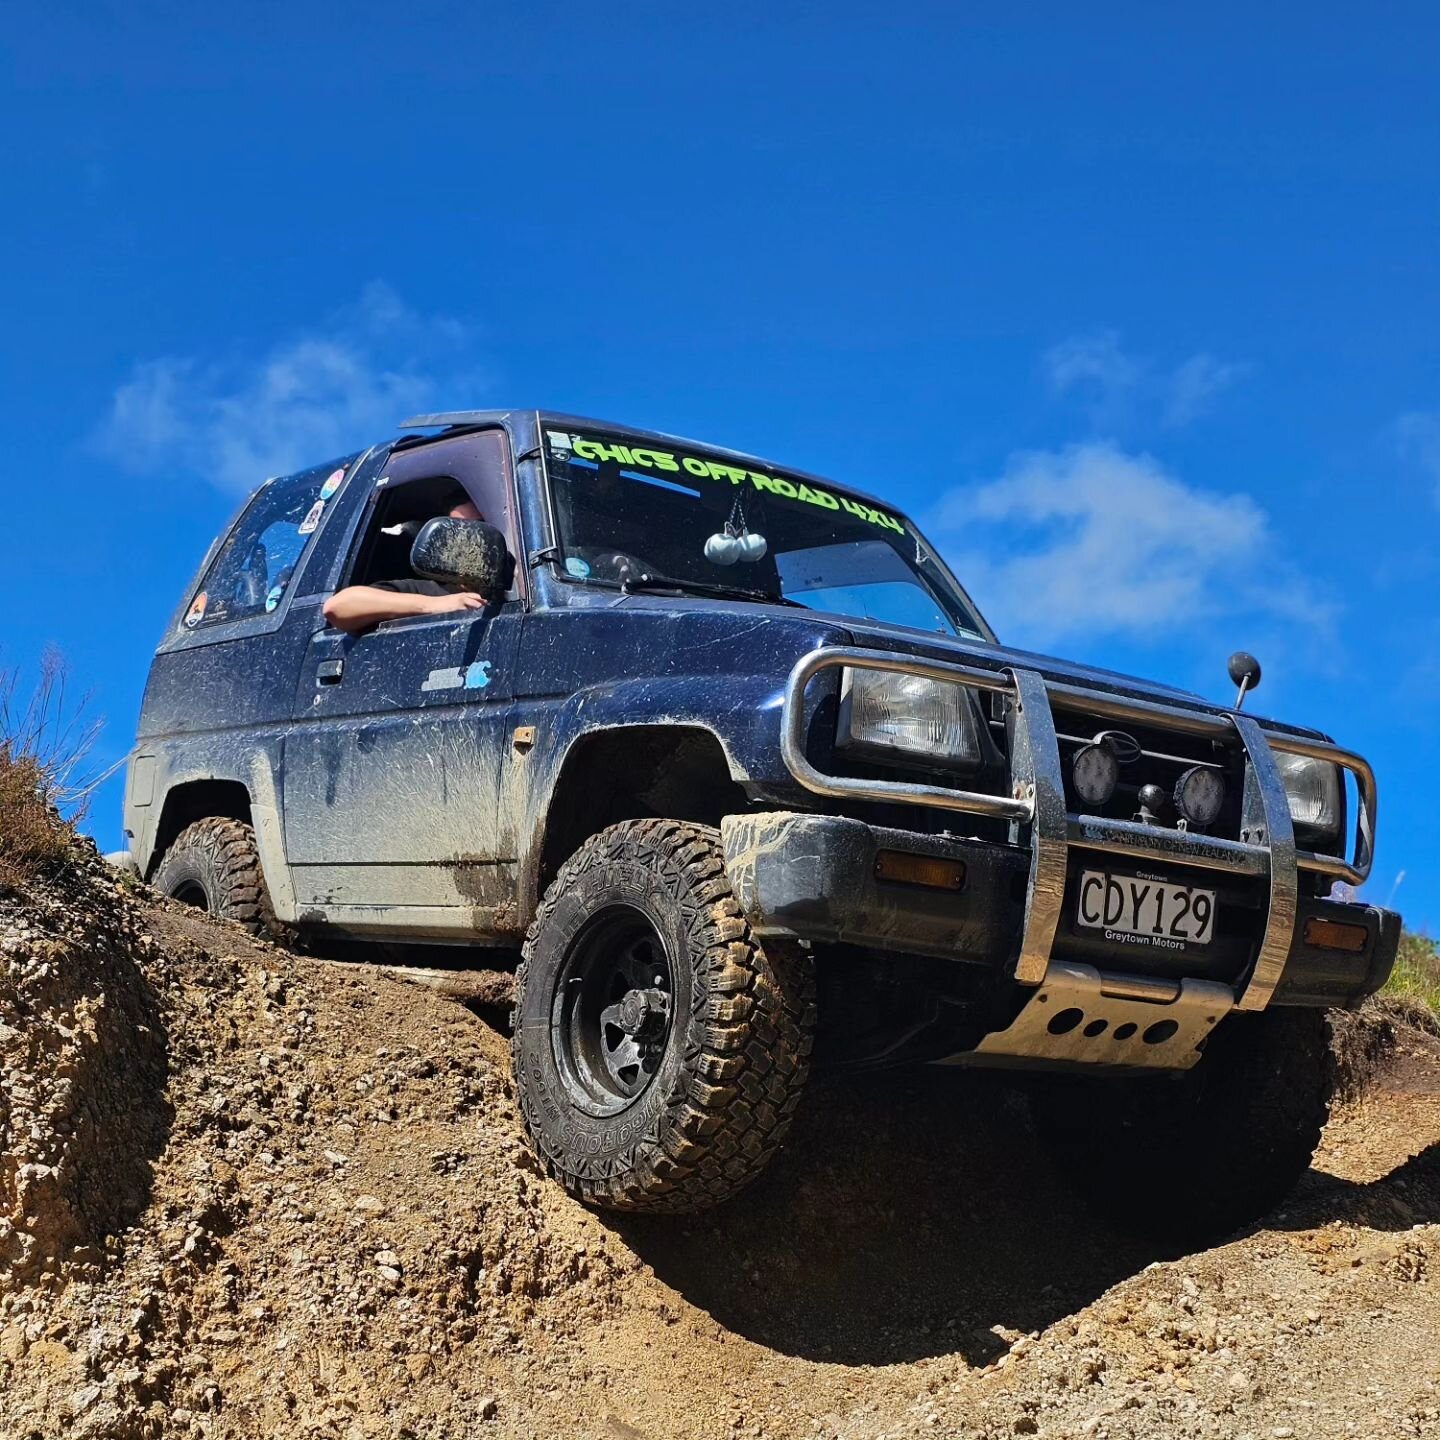 First outing on the NZ tour and Sam immediately bellies the Rocky!! 😅

&quot;Just proof that even if you think you're experienced, new terrain and a new vehicle can make you feel like a beginner 4wder learning the ropes again&quot; - Sam